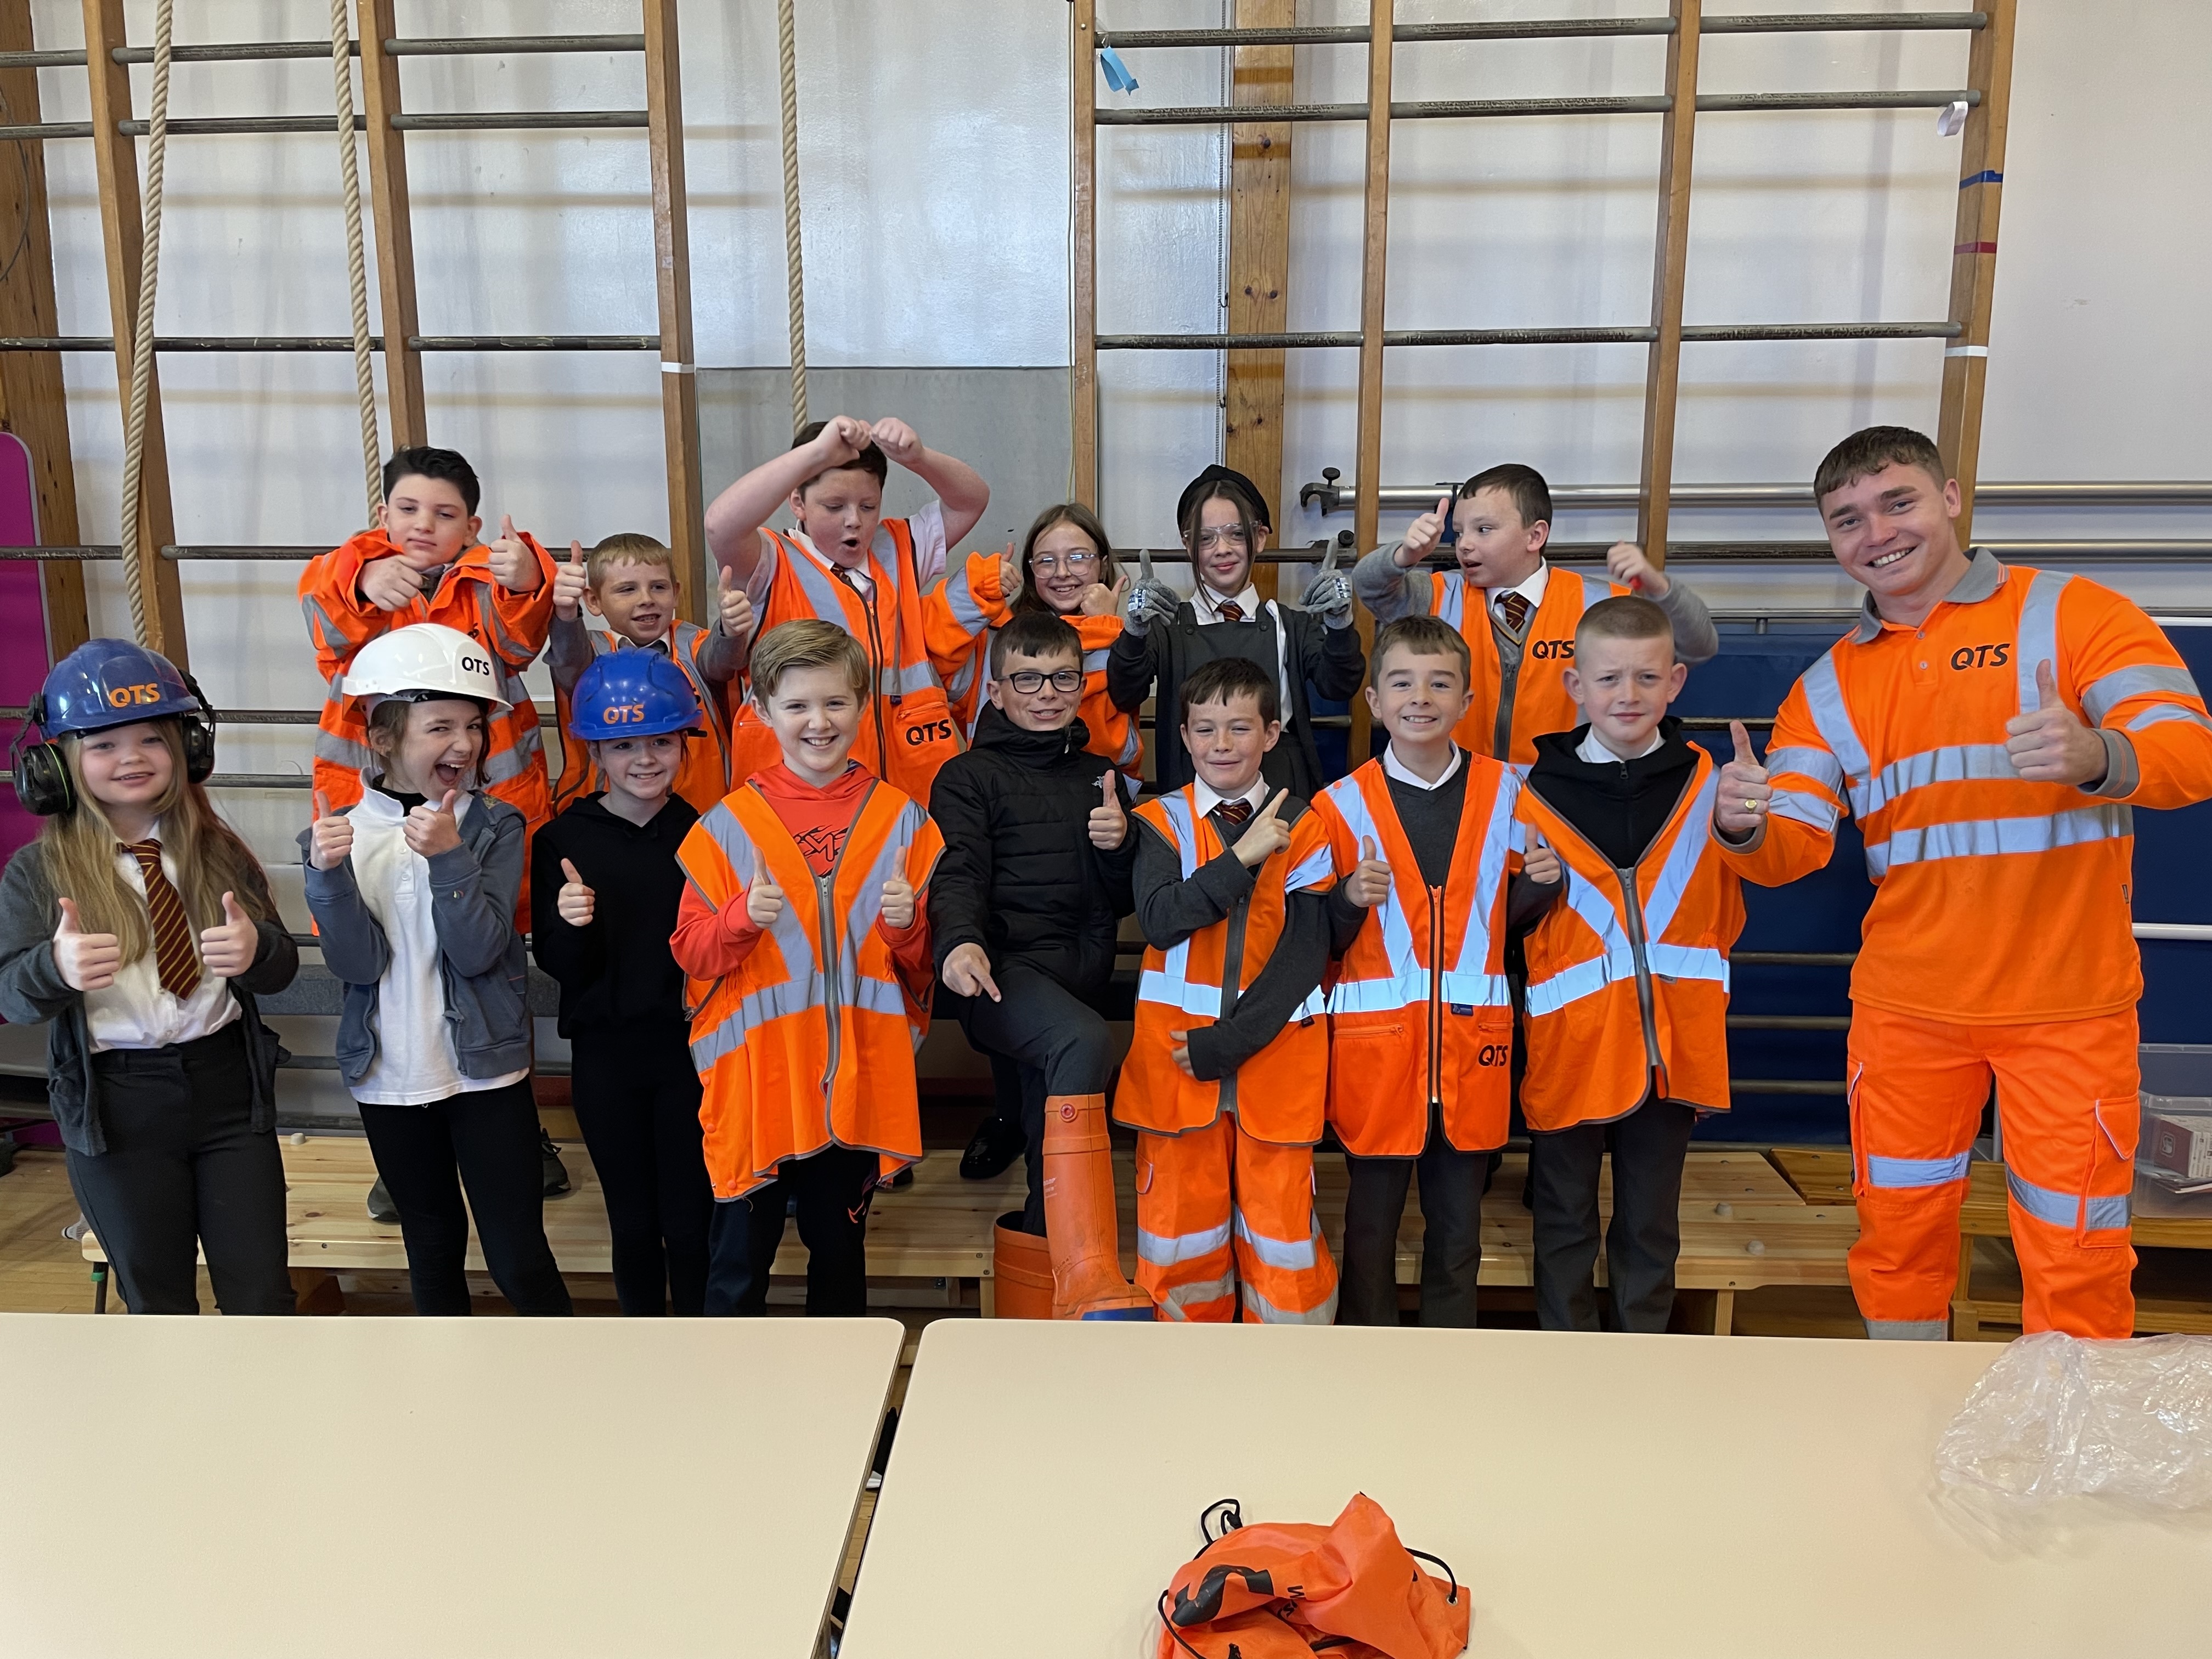 Scotland's Railway carry out engagement session at Holy Cross Primary School